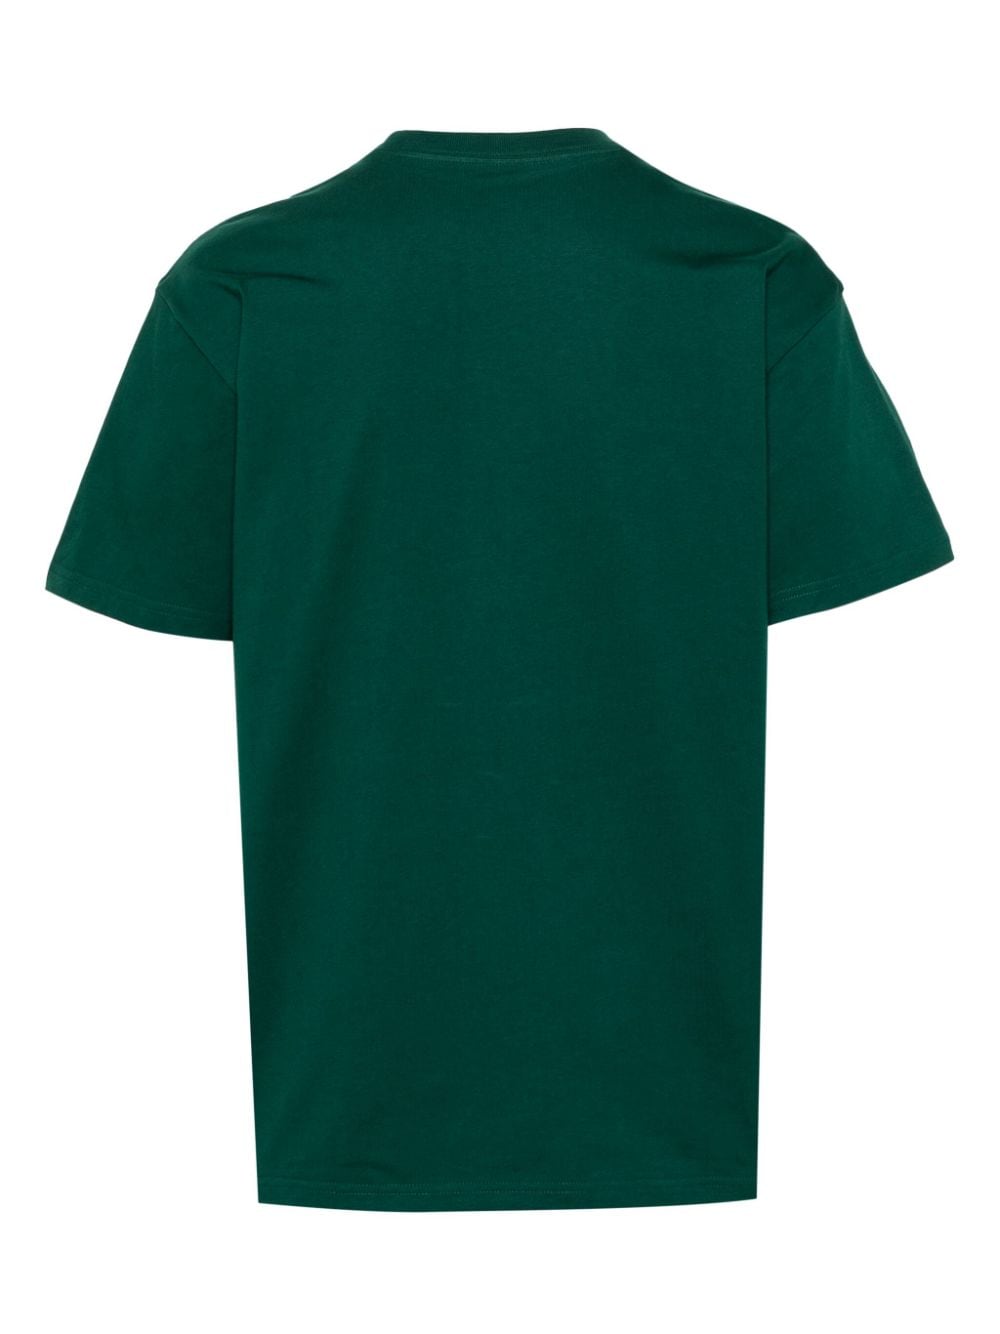 Chase cotton T-shirt<BR/><BR/><BR/>